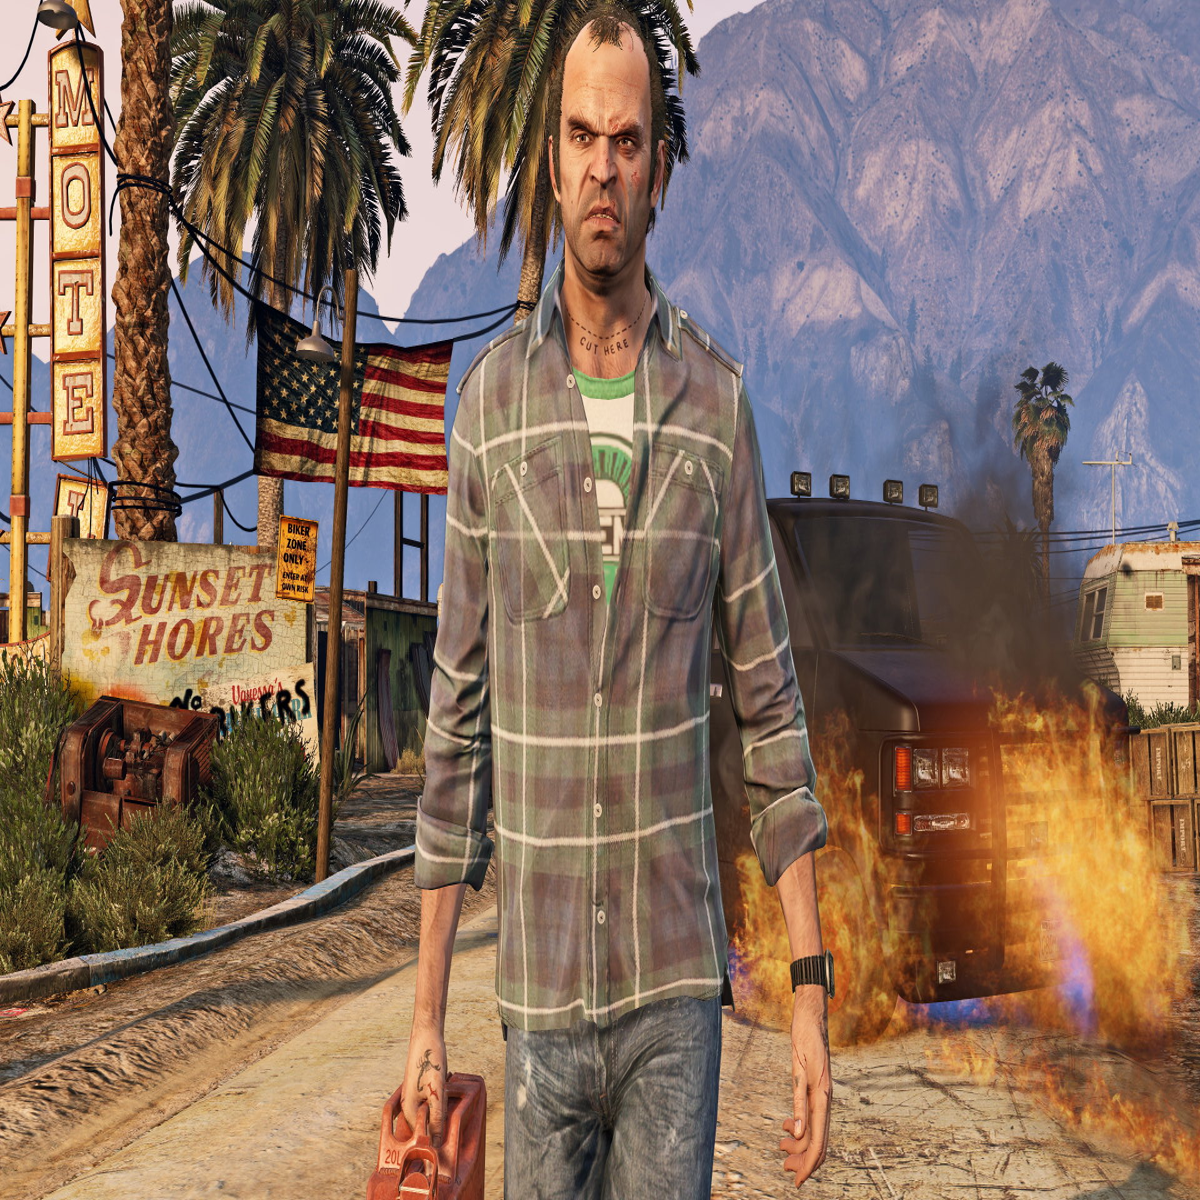 Rockstar Games co-founder Dan Houser's next projects are a graphic